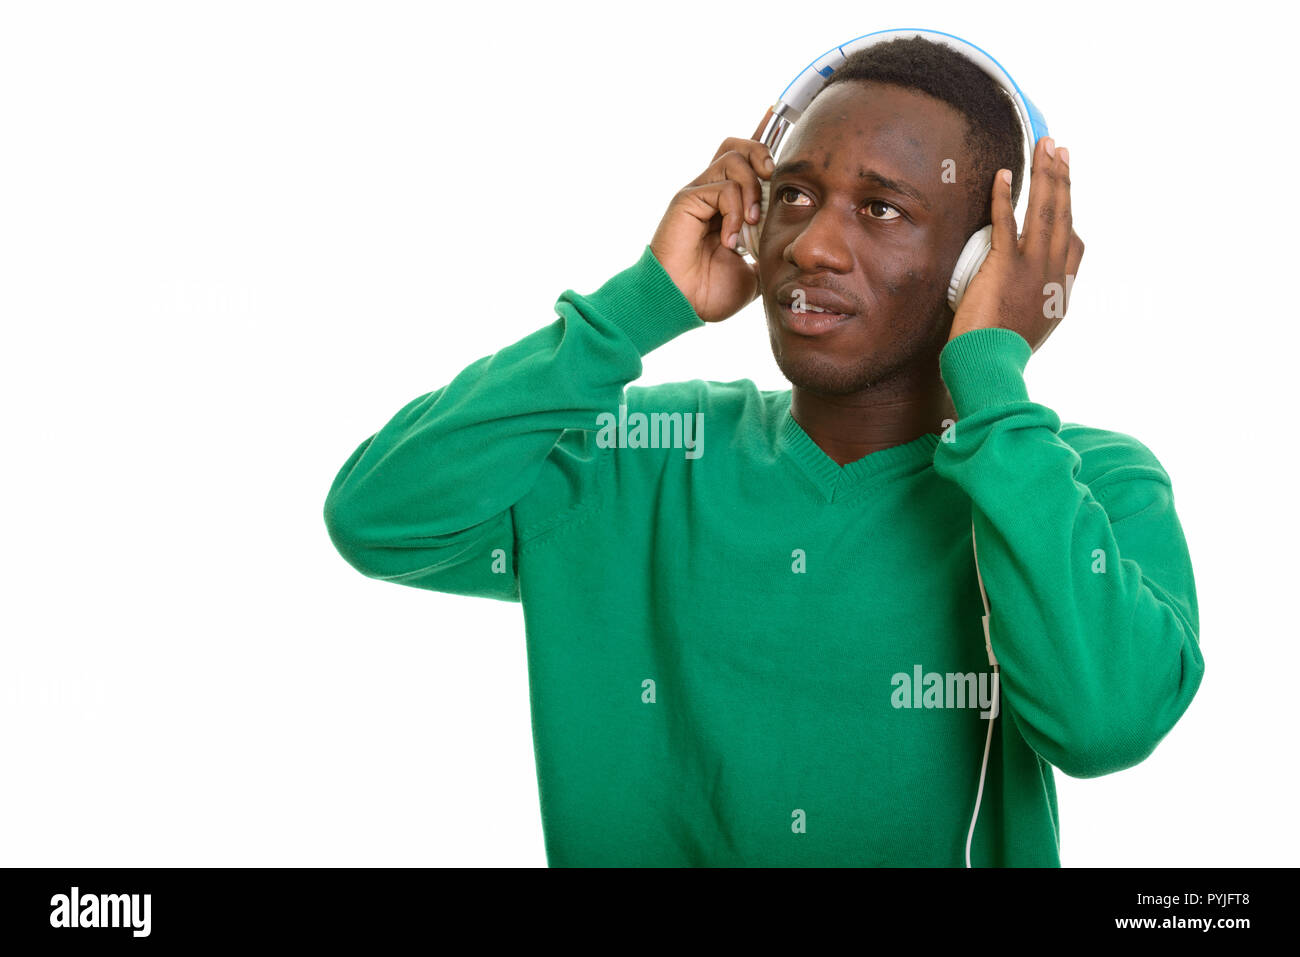 African man listening to music with headphones while thinking Stock Photo